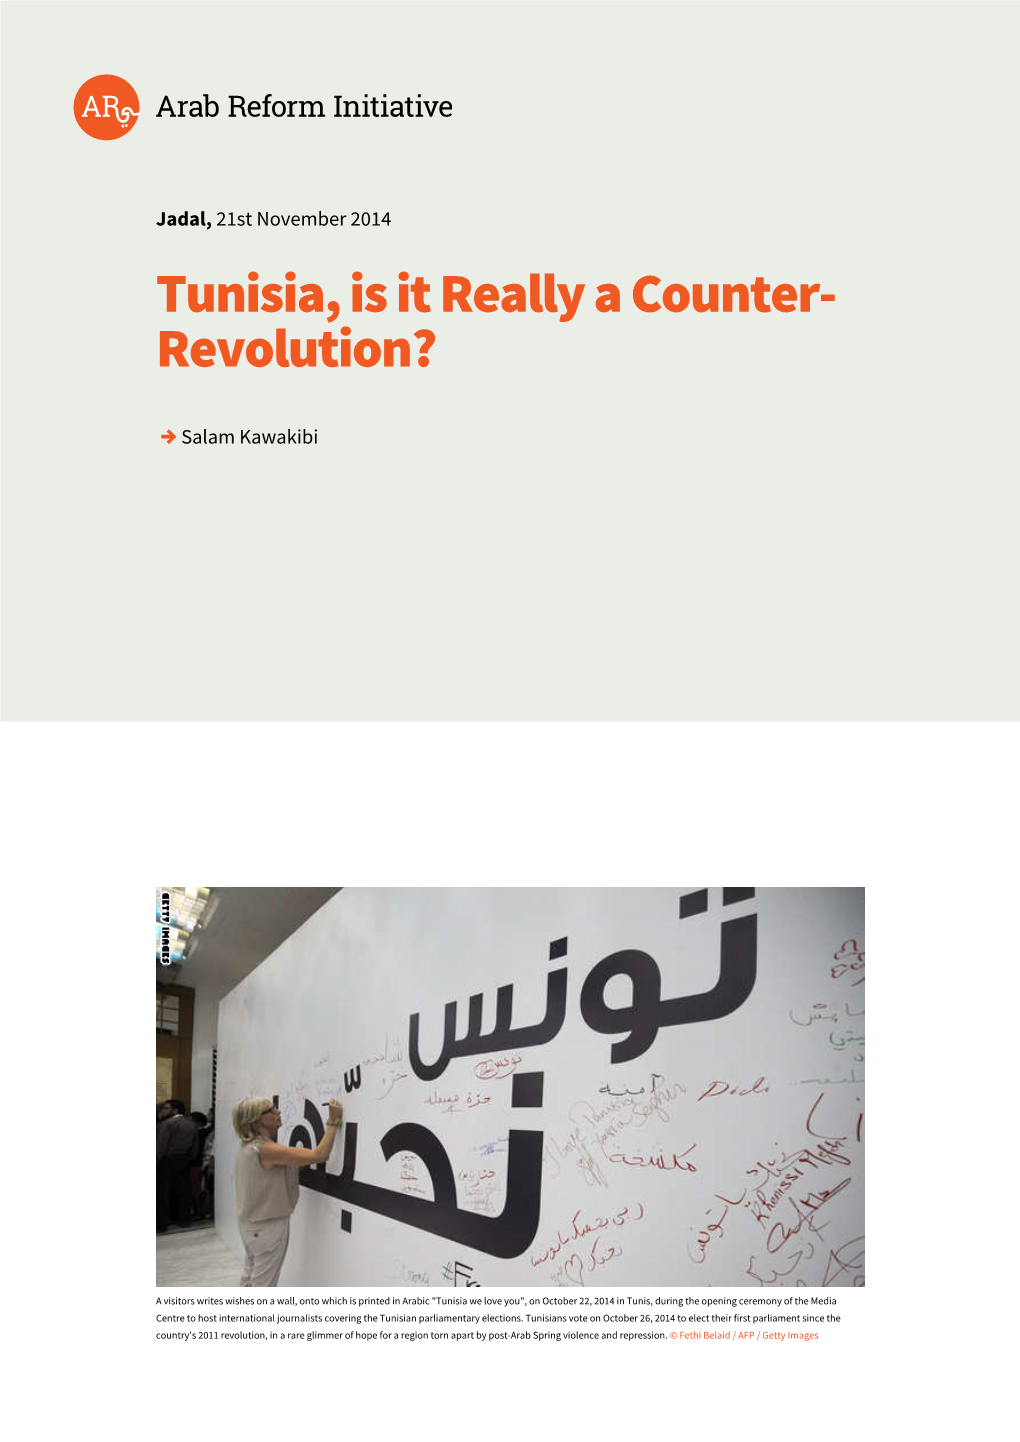 Tunisia, Is It Really a Counter-Revolution?